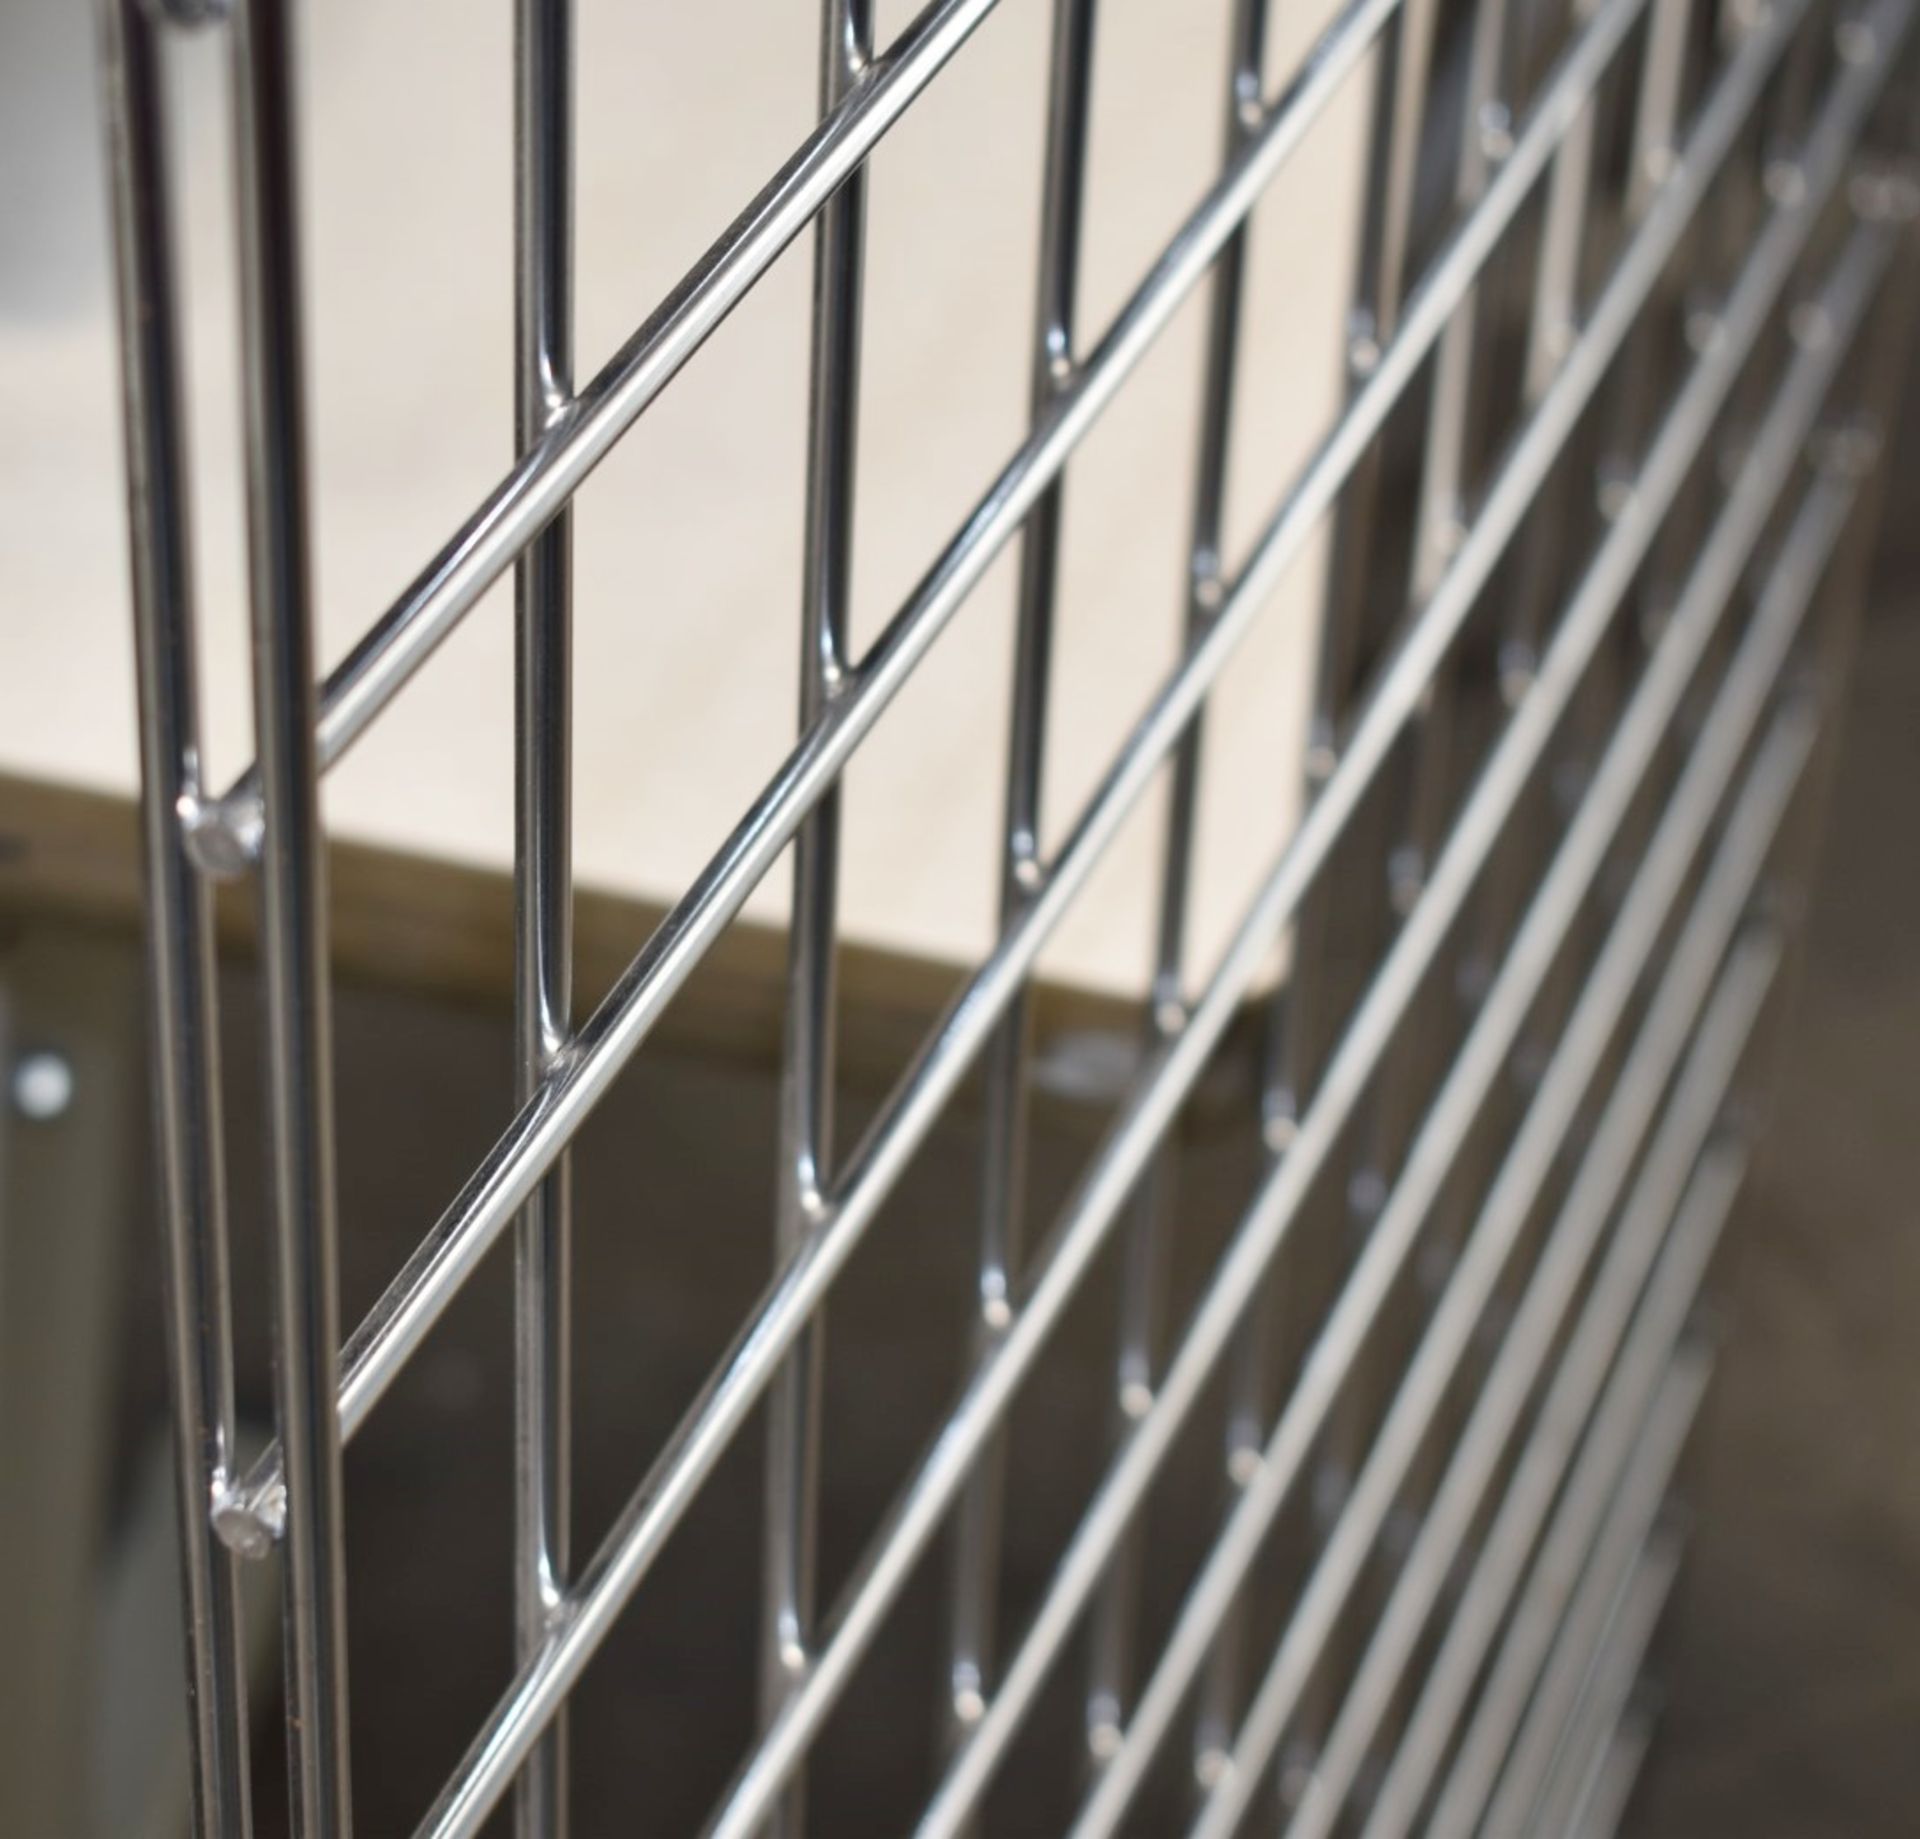 6 x Gridwall Mesh Wall Panels - Heavy Metal Construction in Chrome - Ideal For Making Security Cages - Image 6 of 8